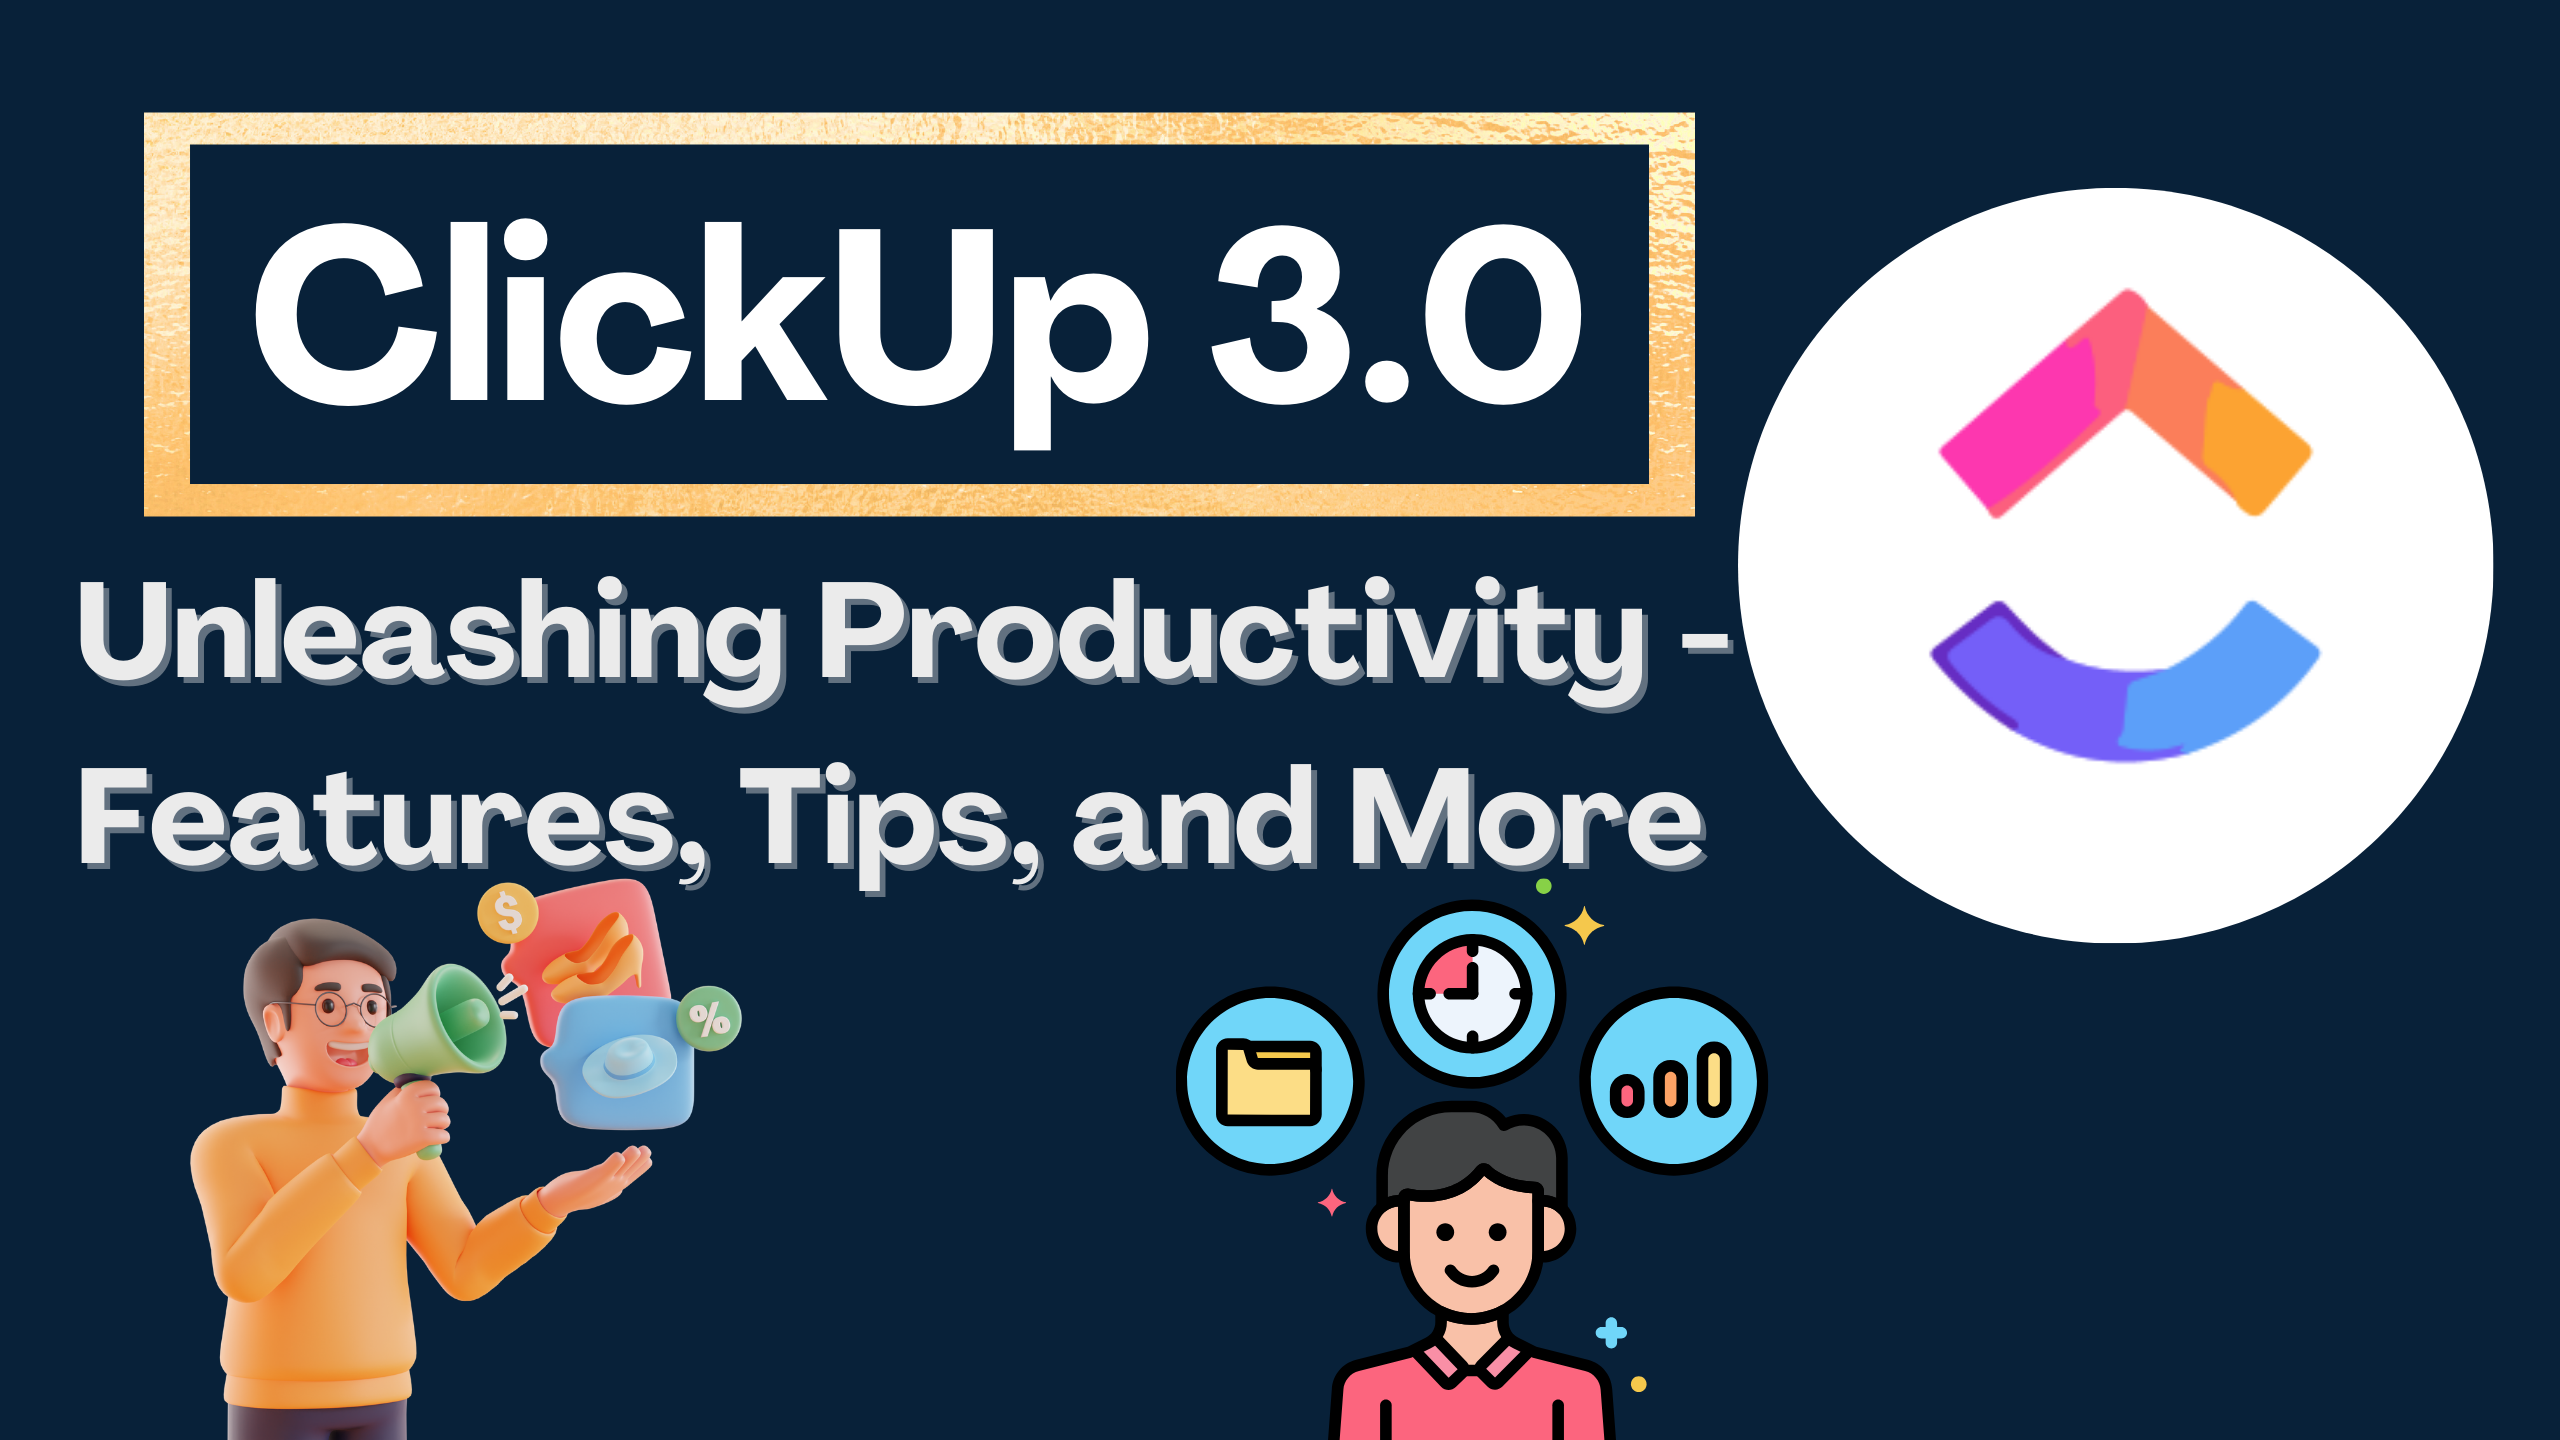 ClickUp 3.0: Unleashing Productivity - Features, Tips, and More 